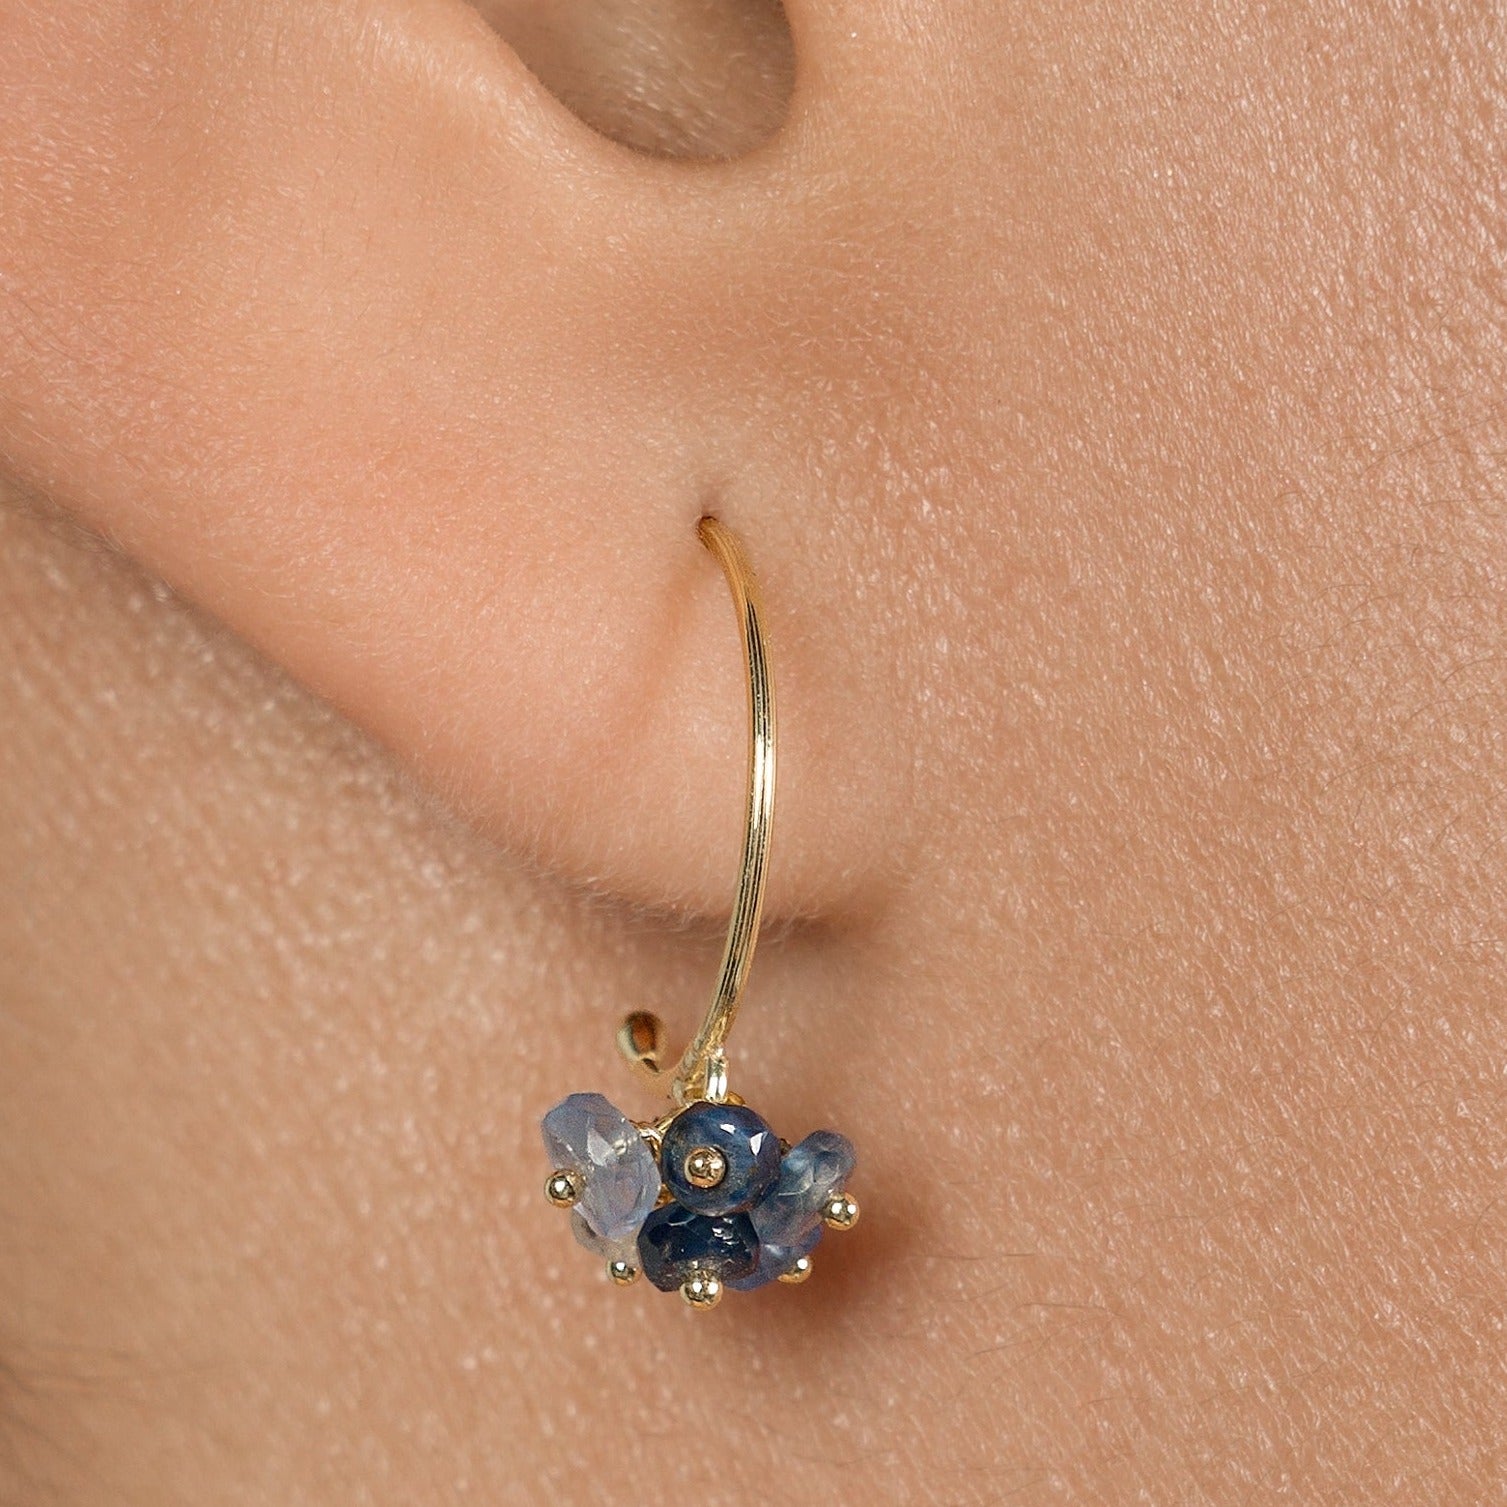 Sweet Pea Pogo Punk 18ct yellow gold small hoops with cluster of sapphire beads in varying shades on model.